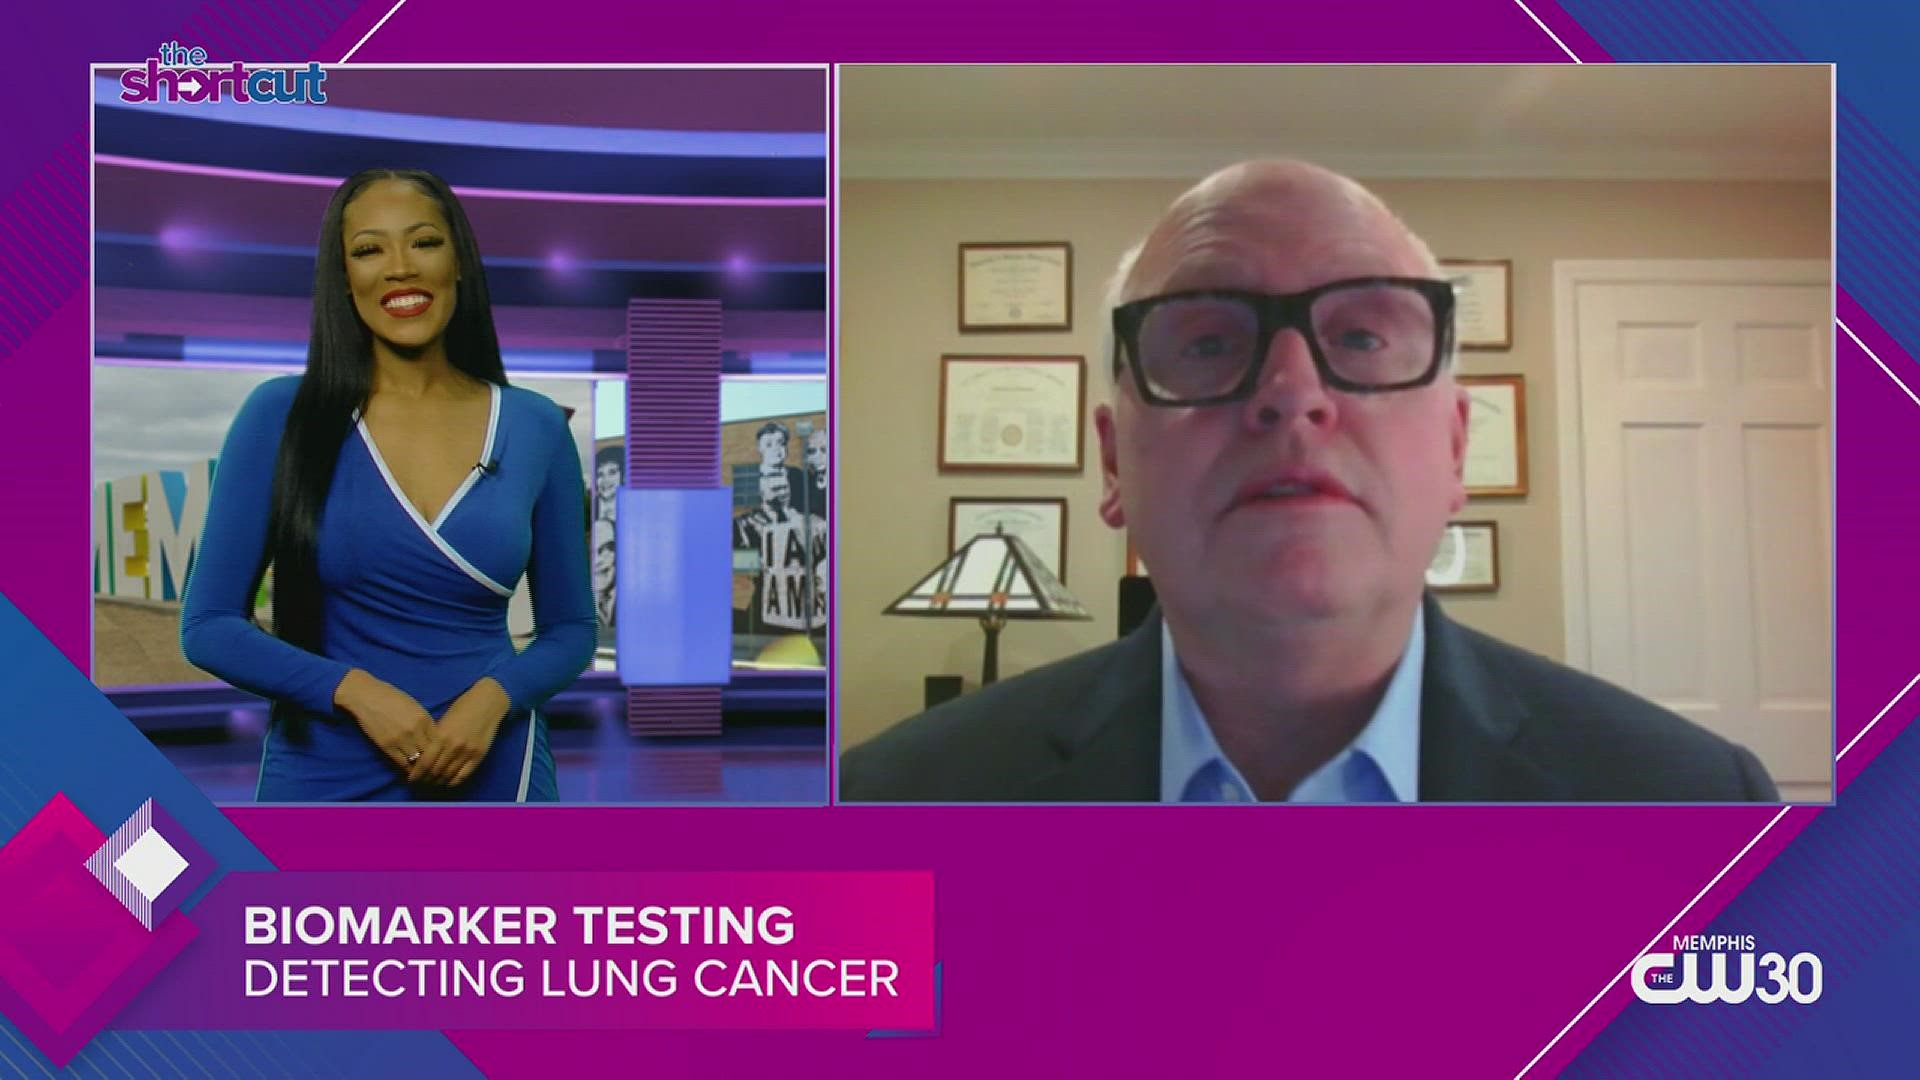 Did you know that lung cancer is the leading cause of death in America? Catch it early using biomarker testing and more! Featuring Dr. David Waterhouse for insight!